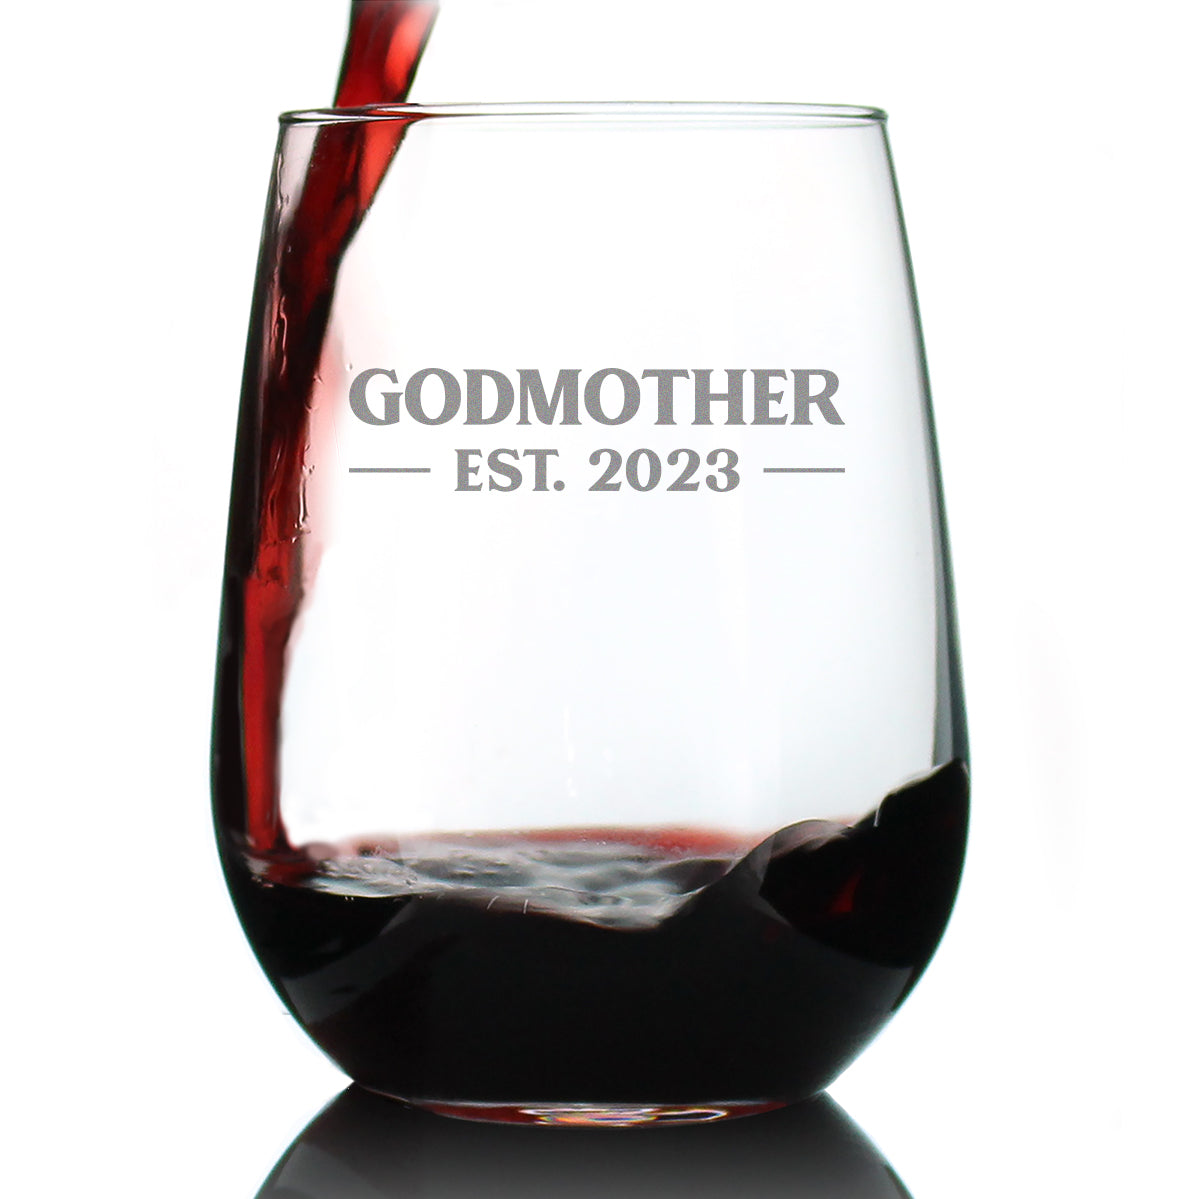 Godmother Est. 2023 -Bold- Cute Stemless Wine Glass for New Godmothers, Large 17 Ounce Size, Etched Sayings, Reveal Gift for New Godparents